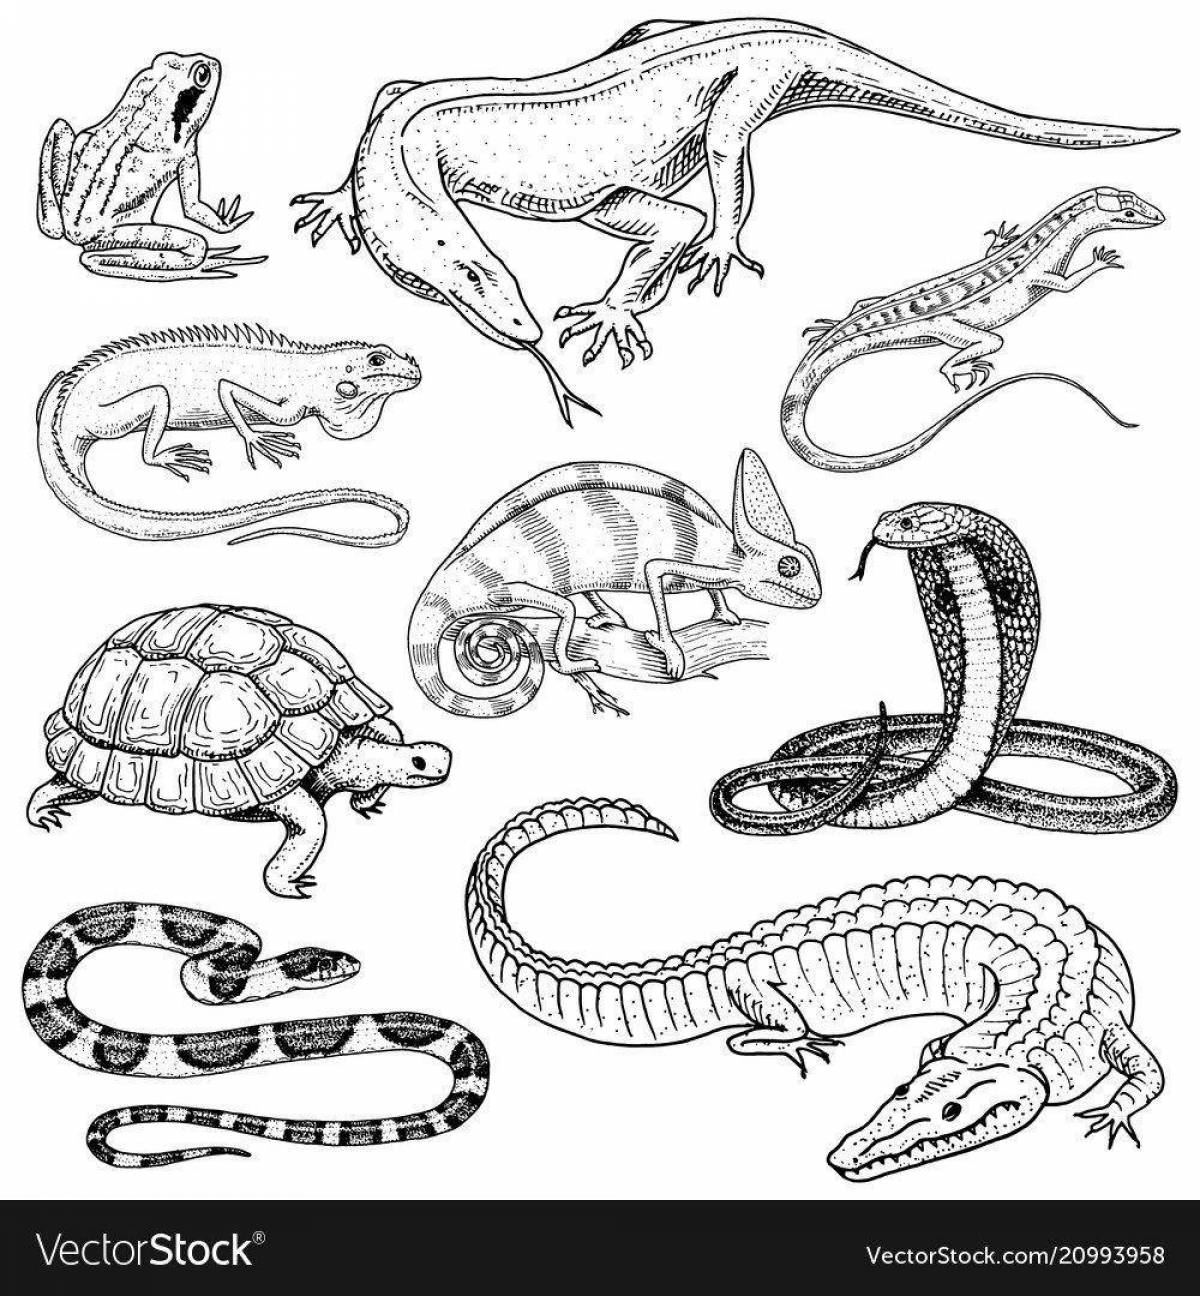 Elegant reptile coloring pages